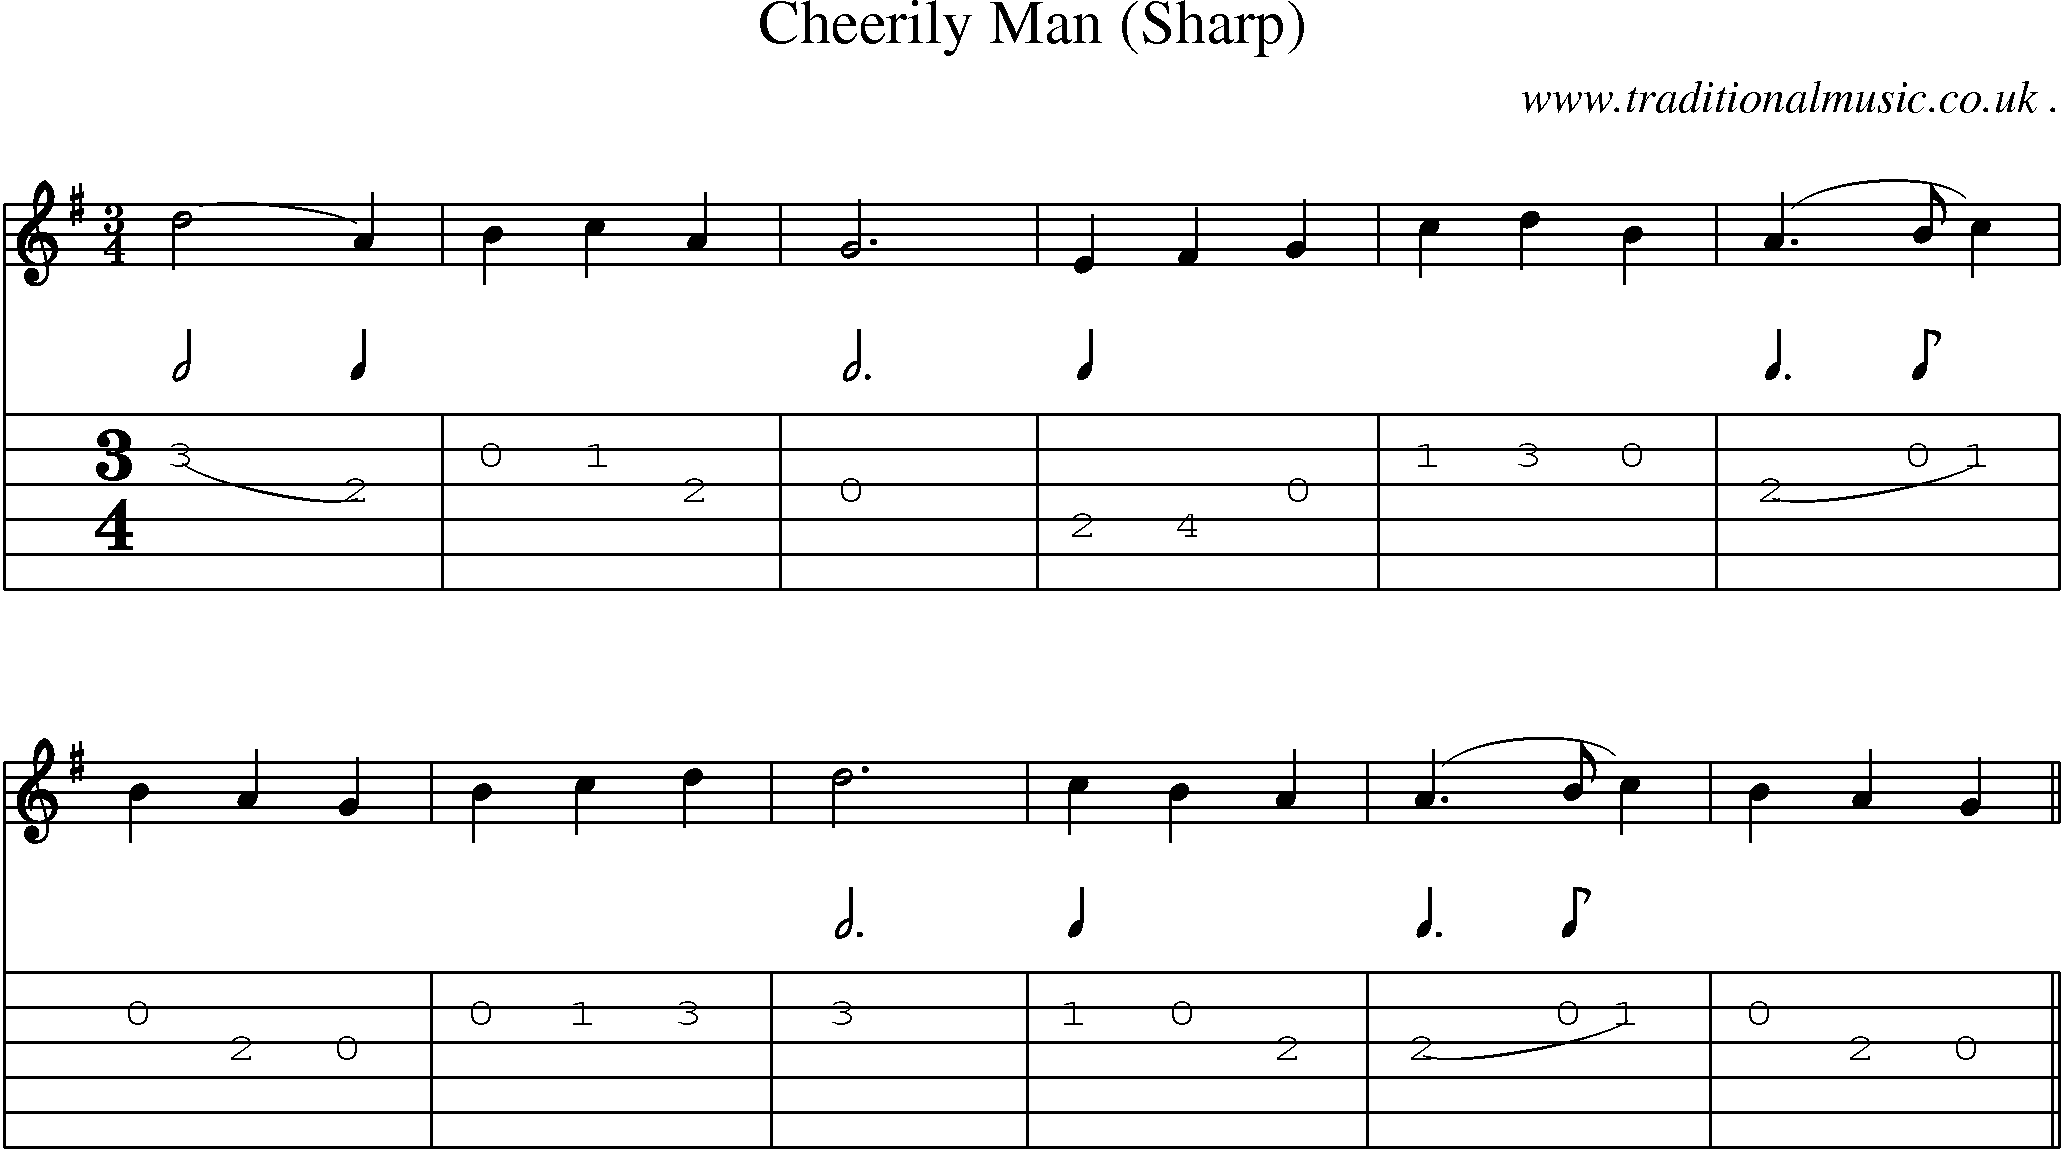 Sheet-Music and Guitar Tabs for Cheerily Man (sharp)